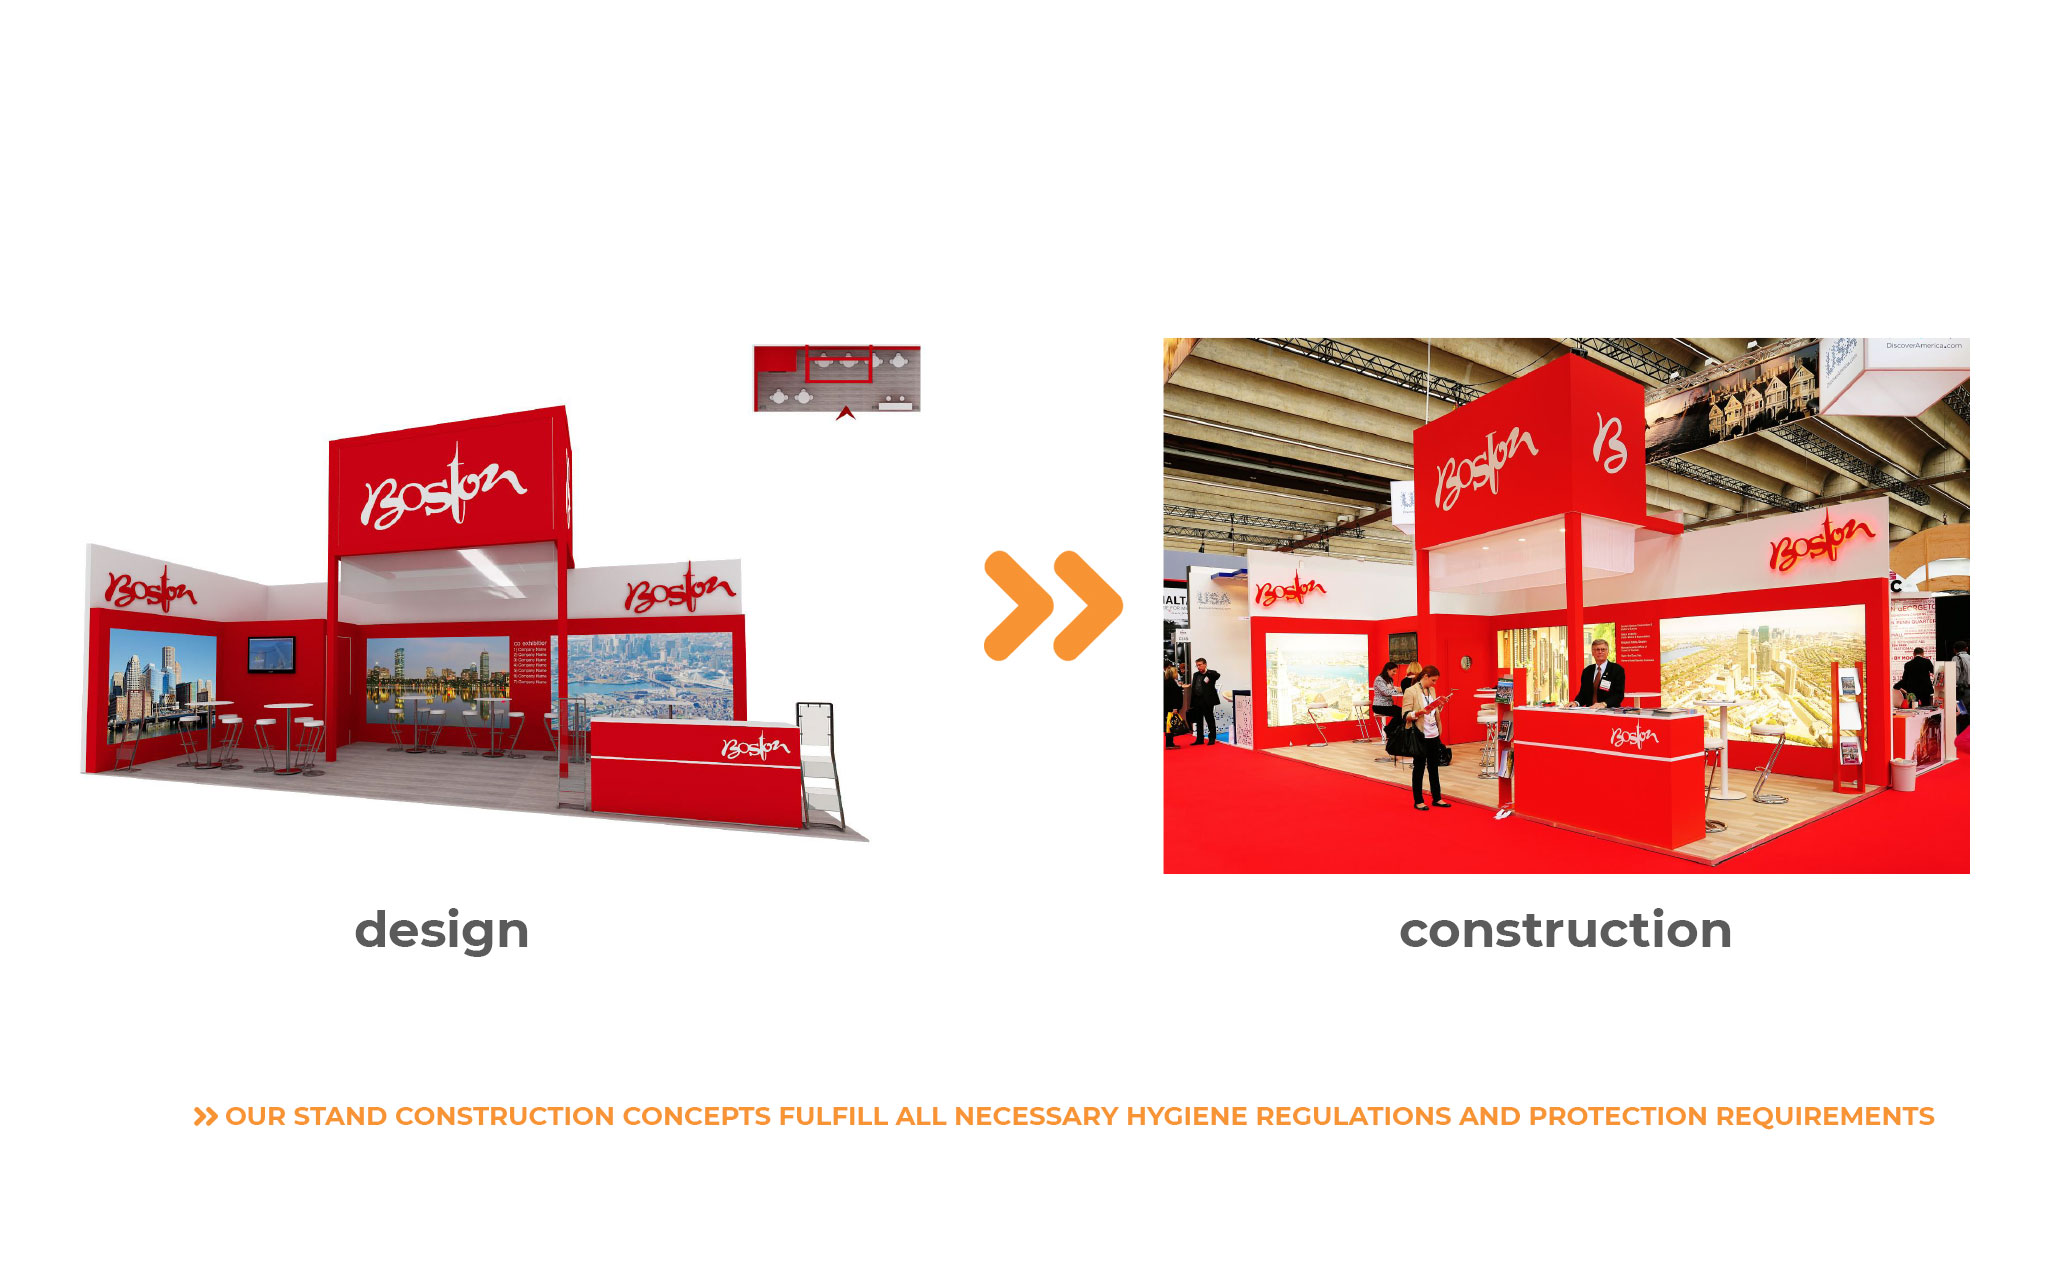 Two stands versions of the same fair stand, one shows a rendering, the other the realization, there is also a COVID-19 notice in the picture saying "our stand construction concepts fulfill all necessary hygiene regulations and protection requirements